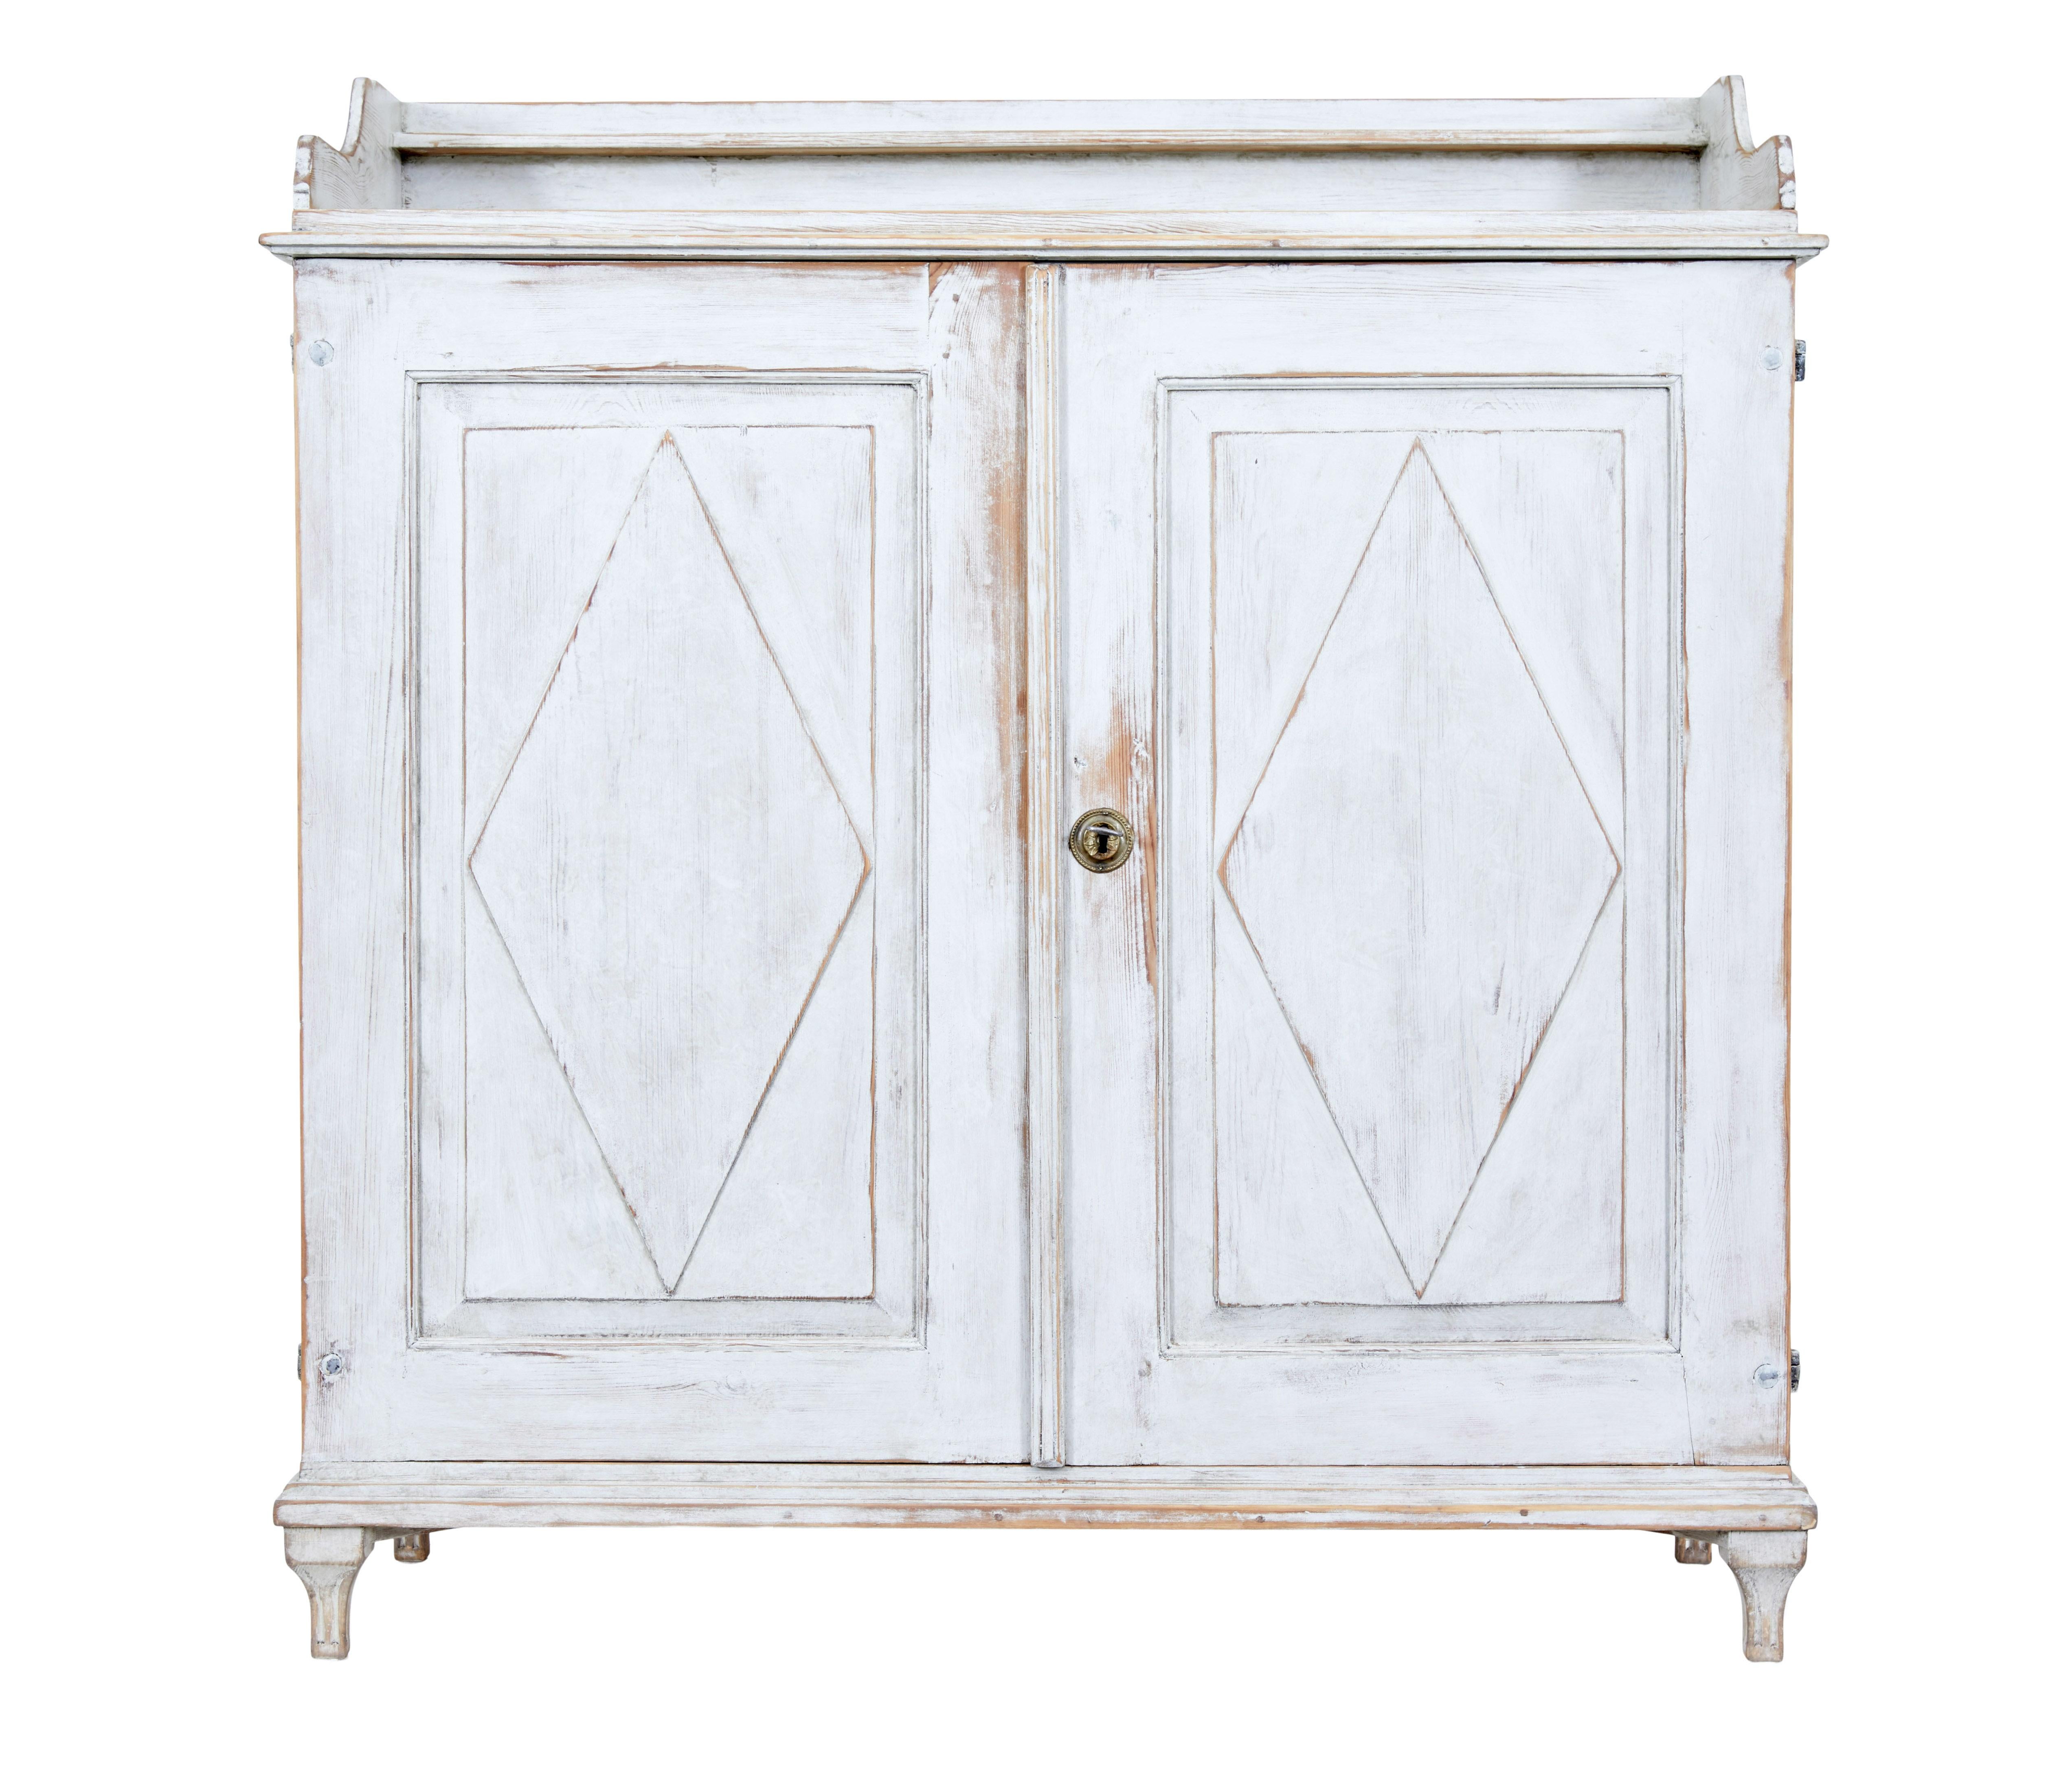 Swedish 19th century painted pine cupboard circa 1870.

Superb quality piece which would function well in multiple rooms such as a kitchen, bedroom or linen room.  This piece would sit well in a modern or traditional interior.

Made in generous